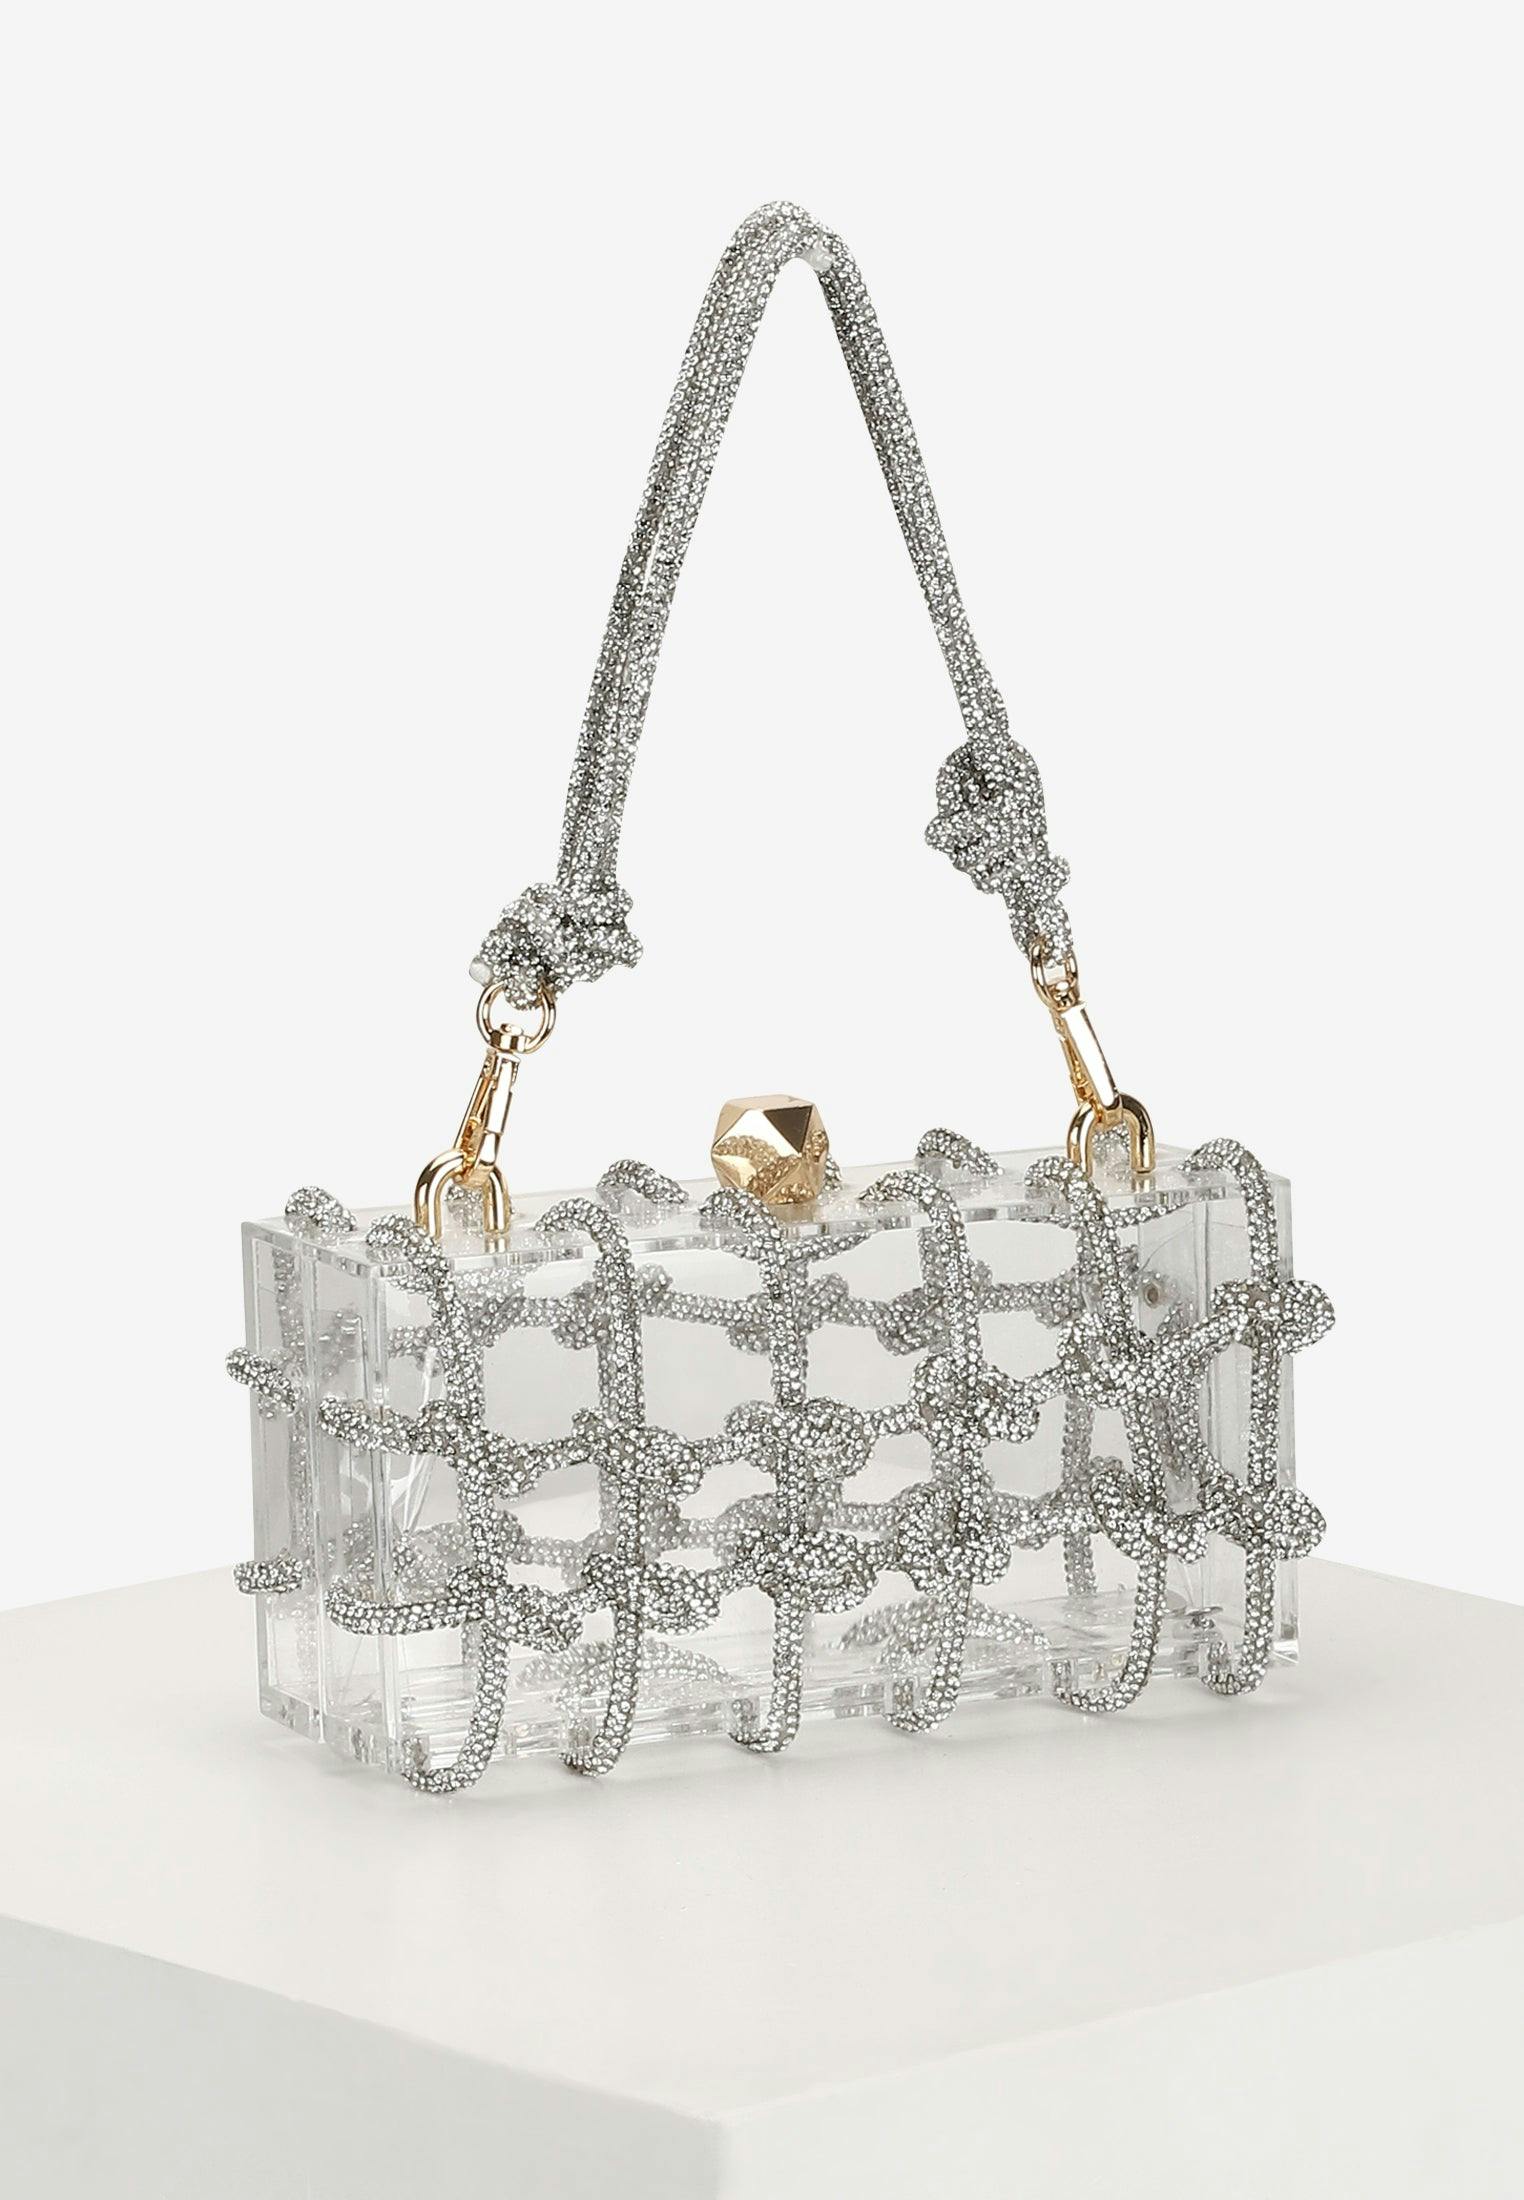 Orion Rhinestone Clutch, a product by Lola's